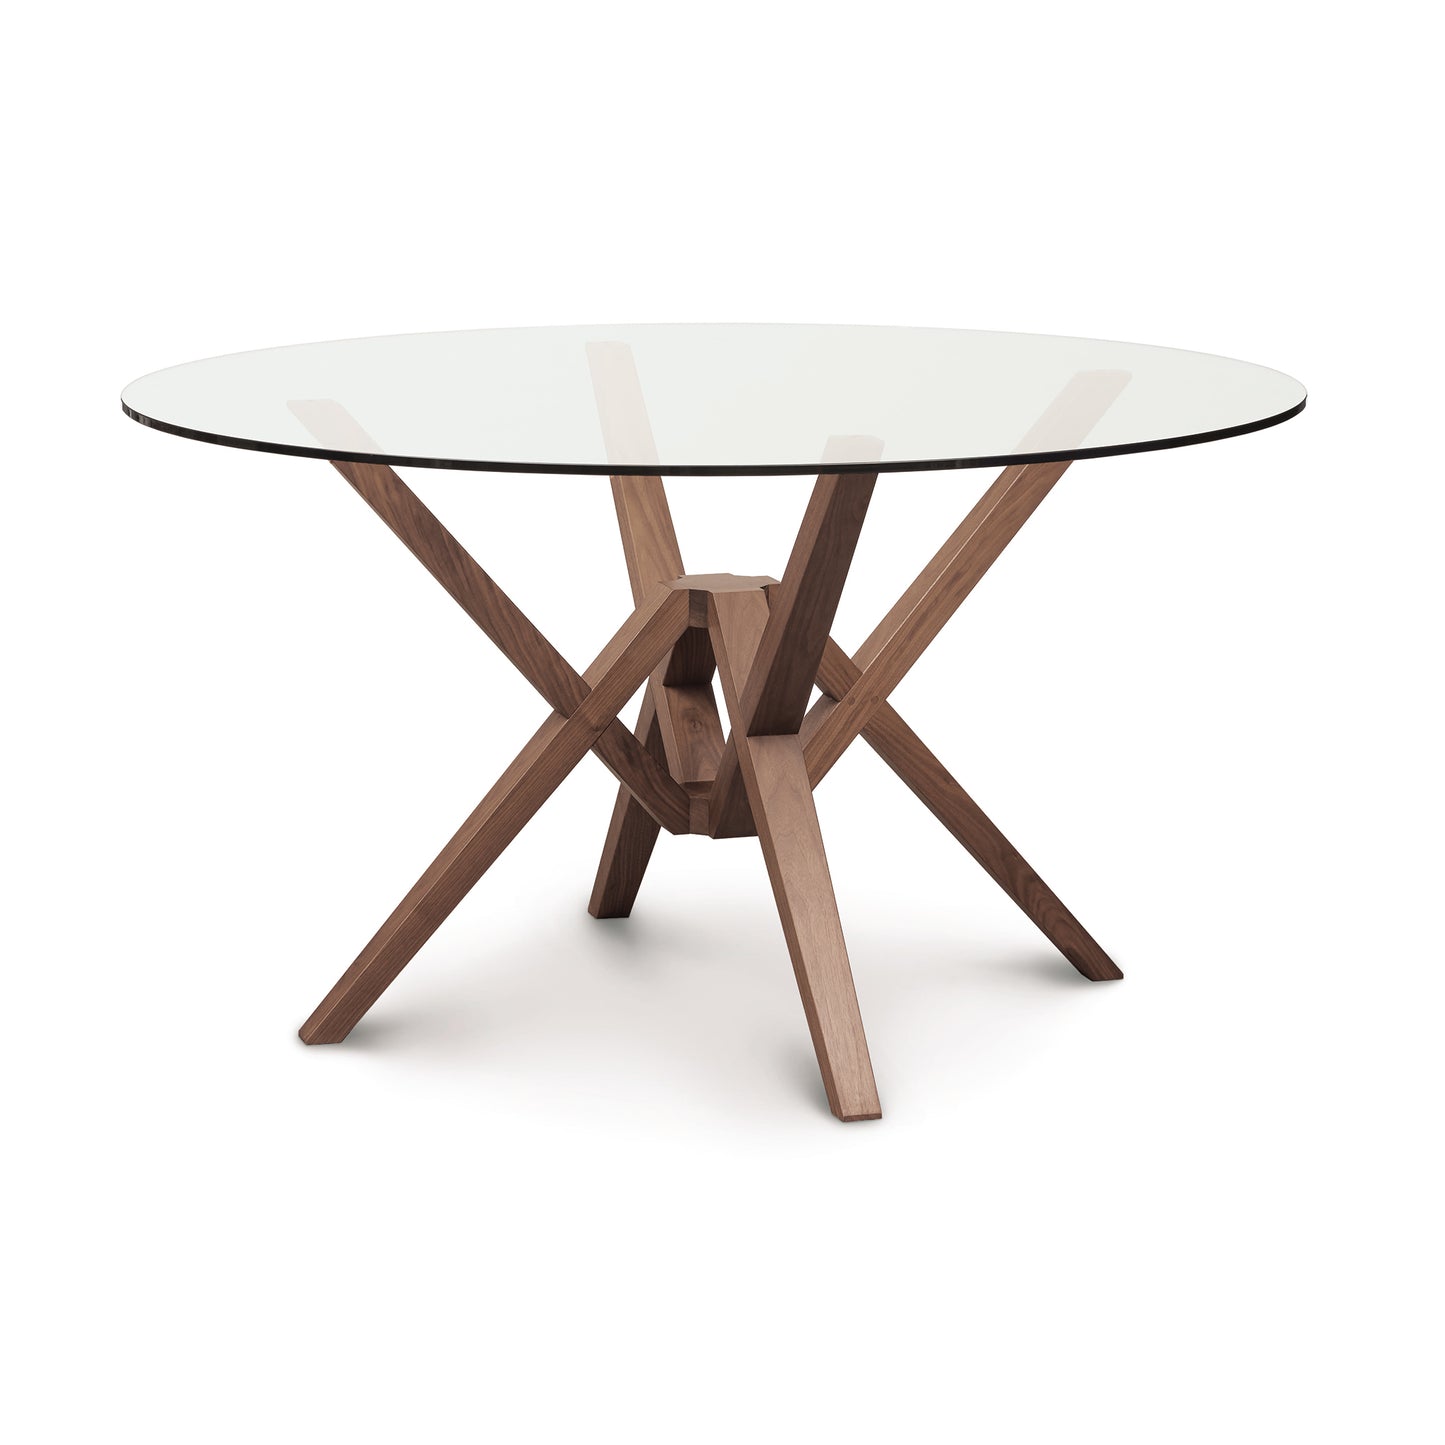 An Copeland Furniture Exeter Round Glass Top Dining Table with a solid wood base crafted from sustainably harvested hardwoods.